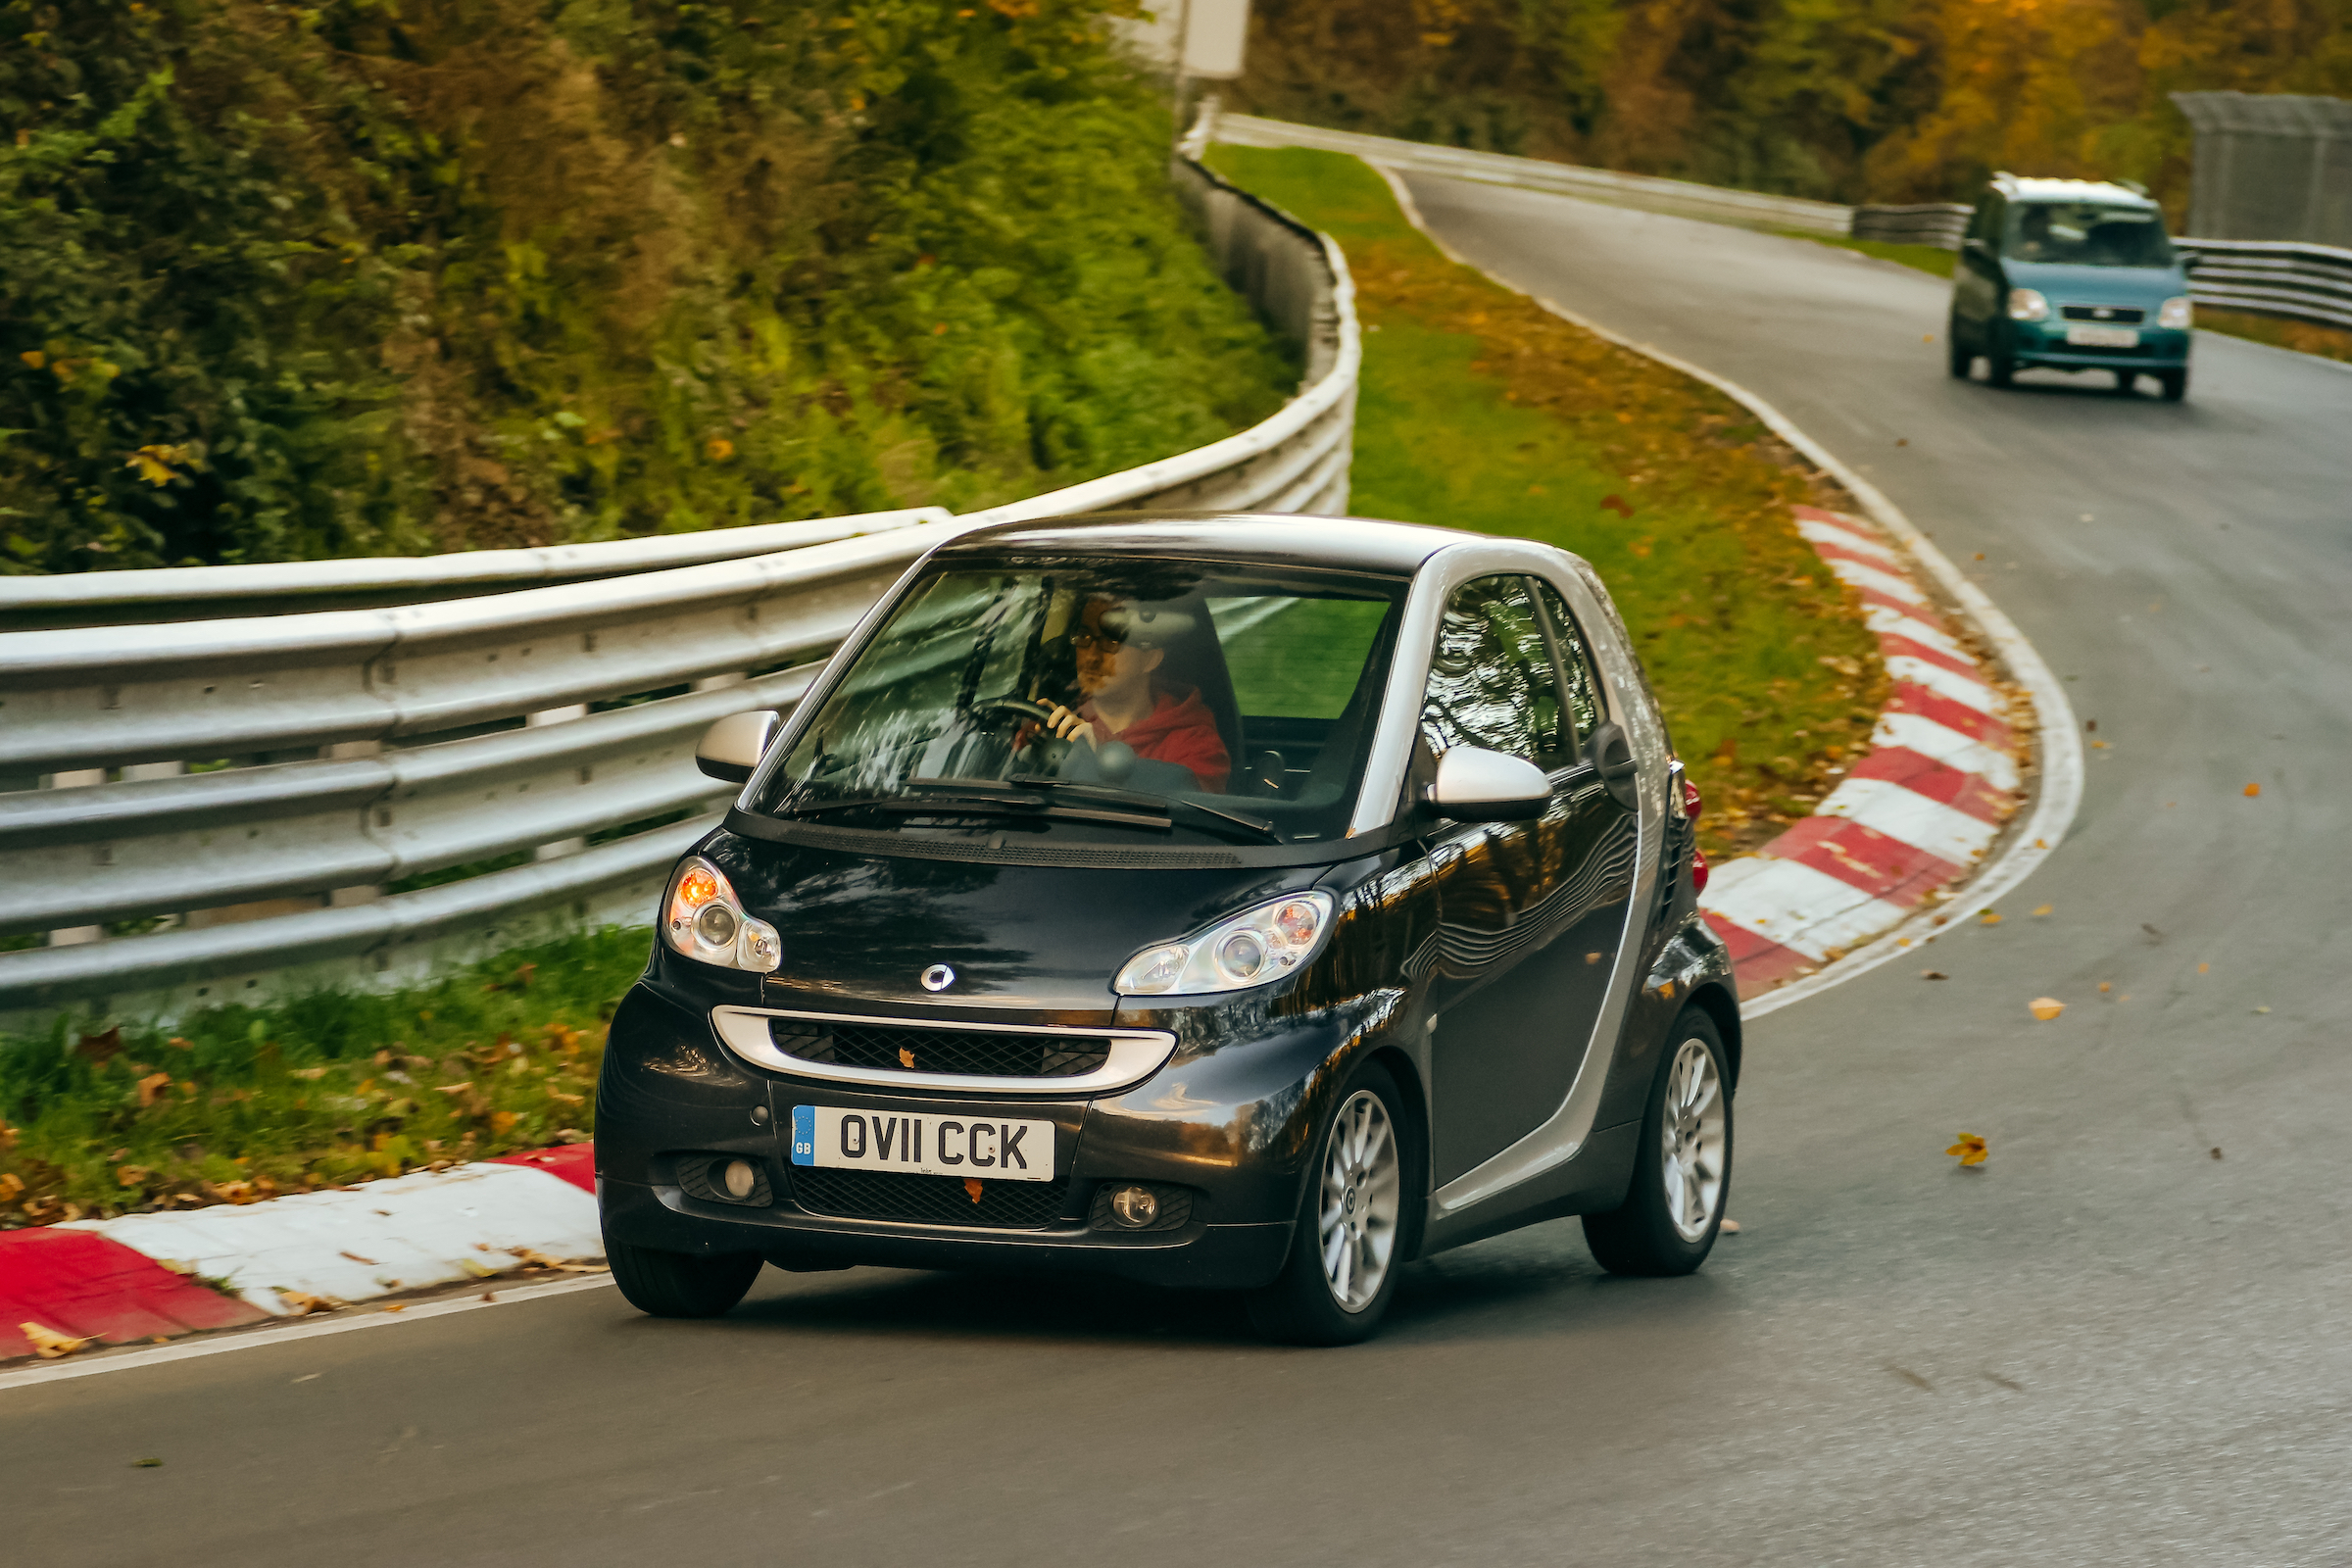 I took my ridiculous car to the Nürburgring and you can too